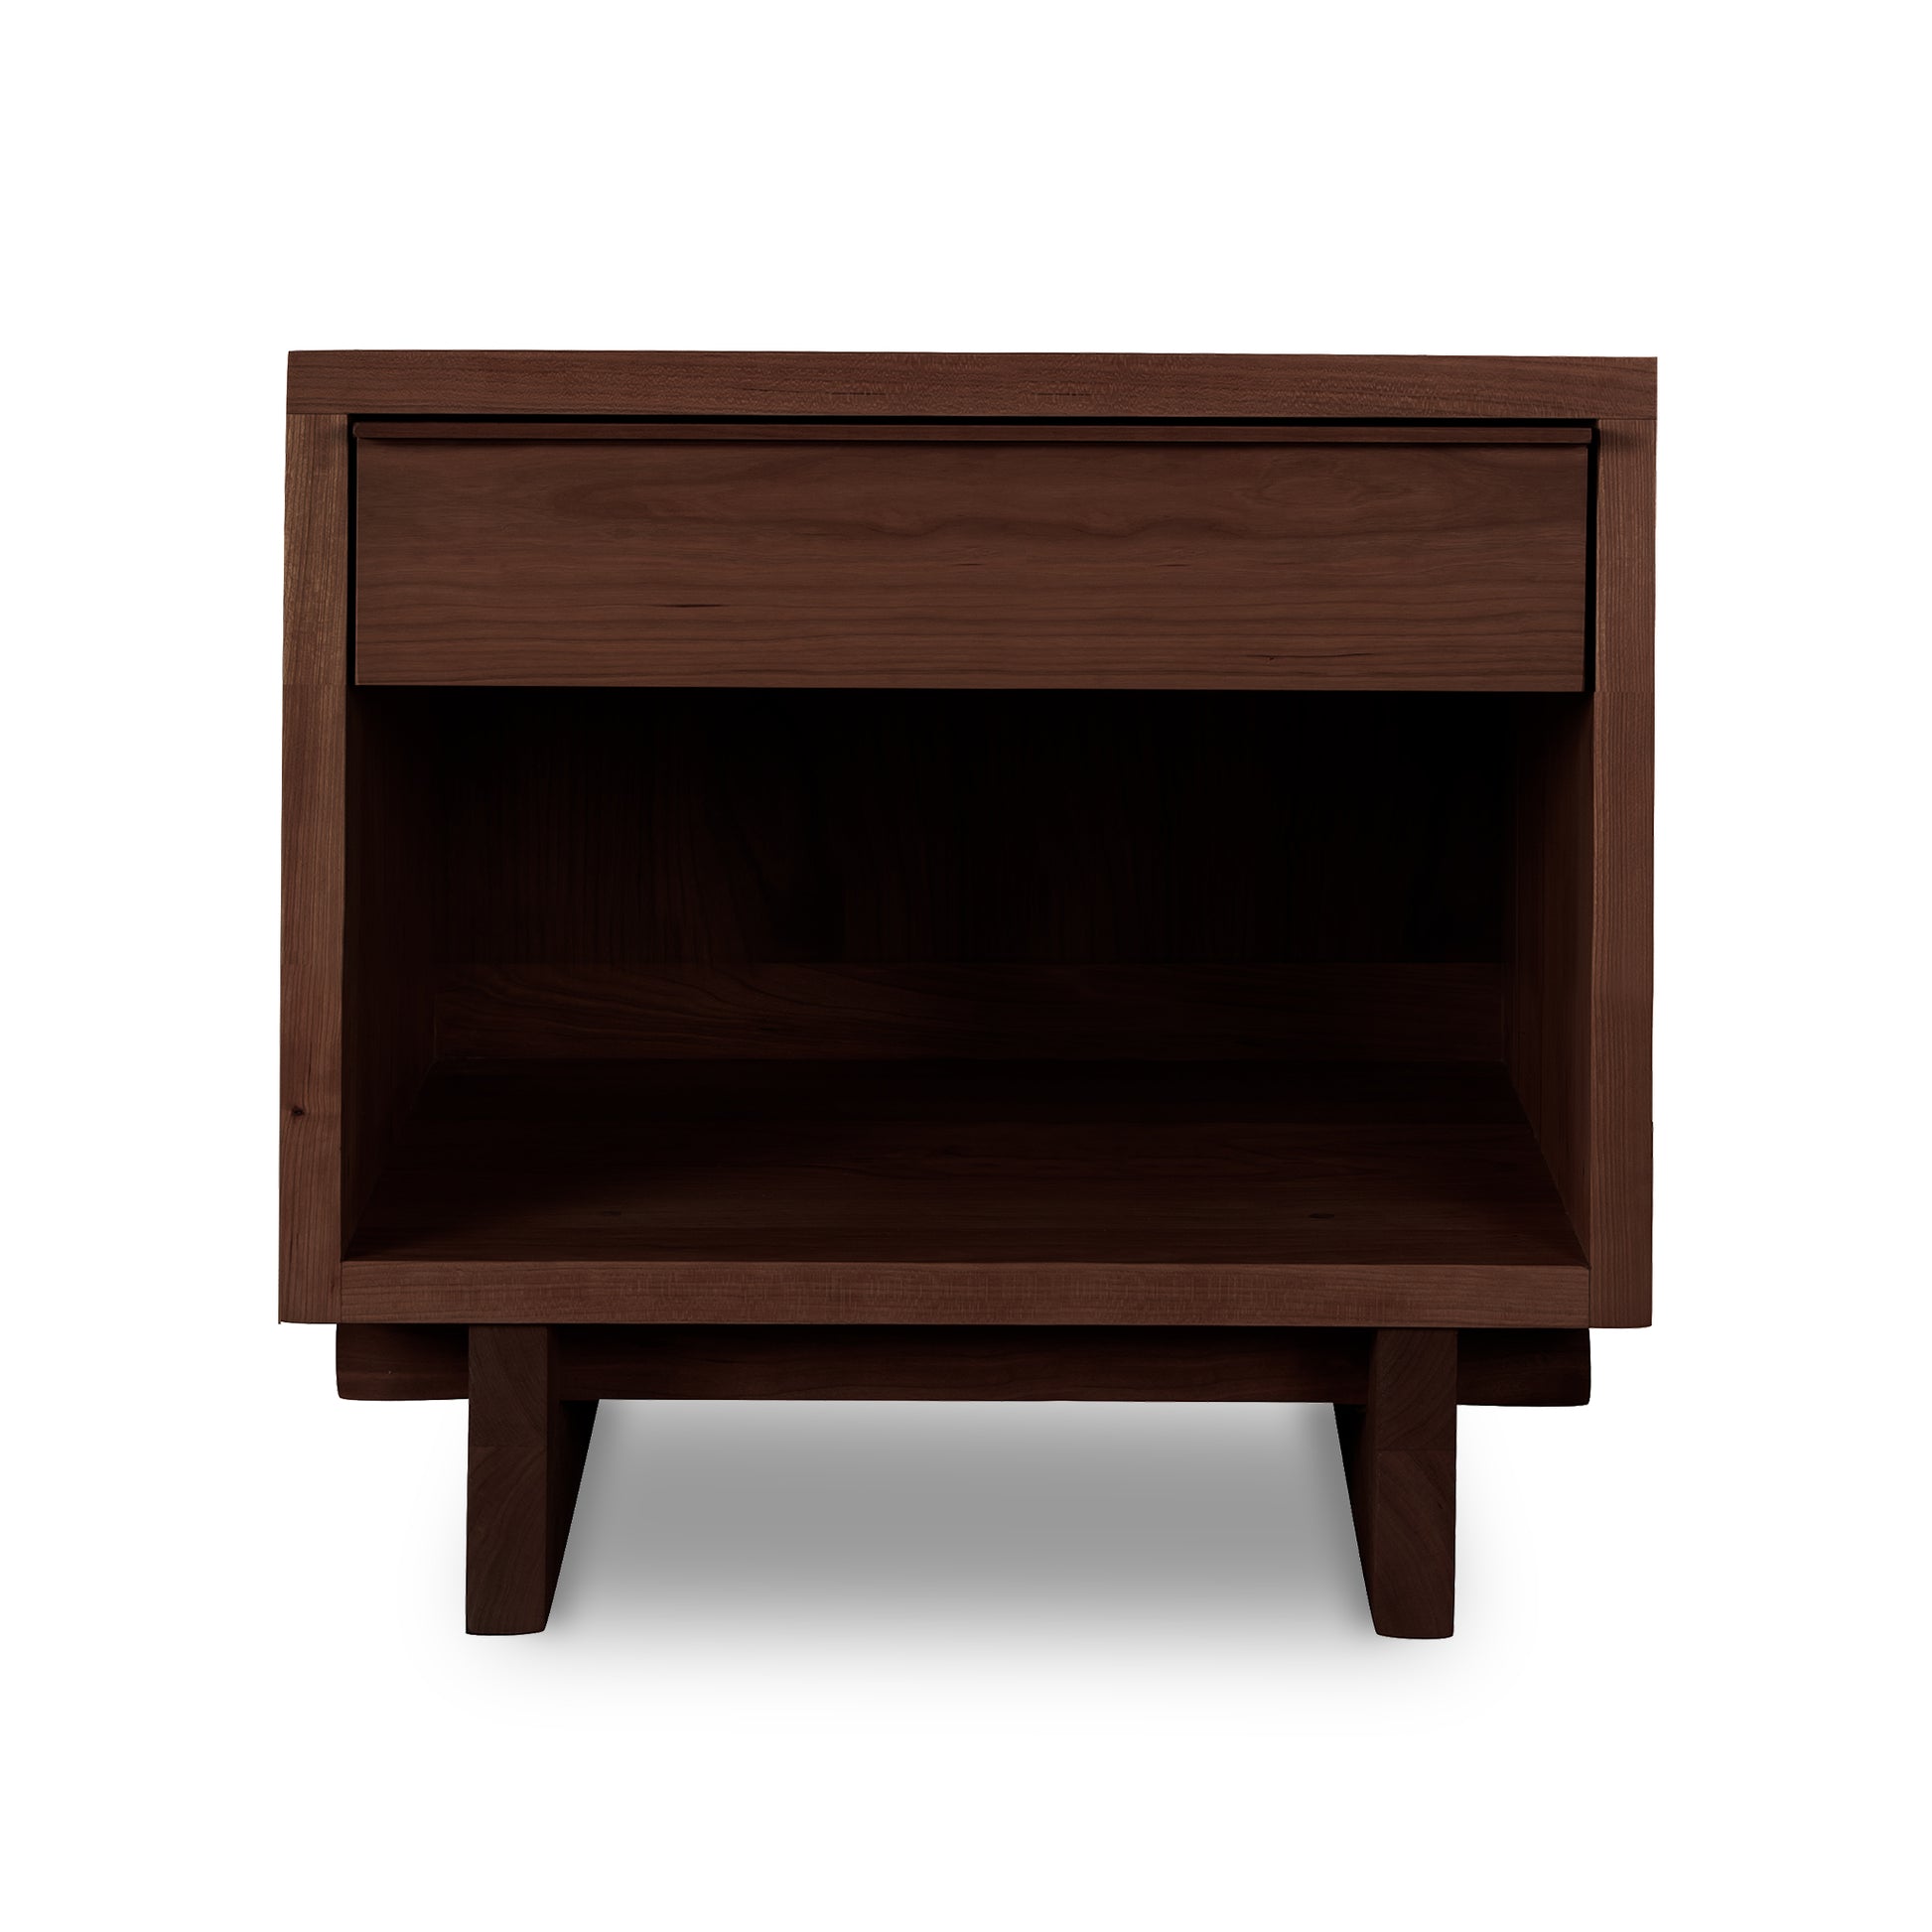 A Vermont Furniture Designs Kipling 1-Drawer Enclosed Shelf Wide Nightstand, natural wood furniture piece with an open drawer and an empty shelf, isolated on a white background.